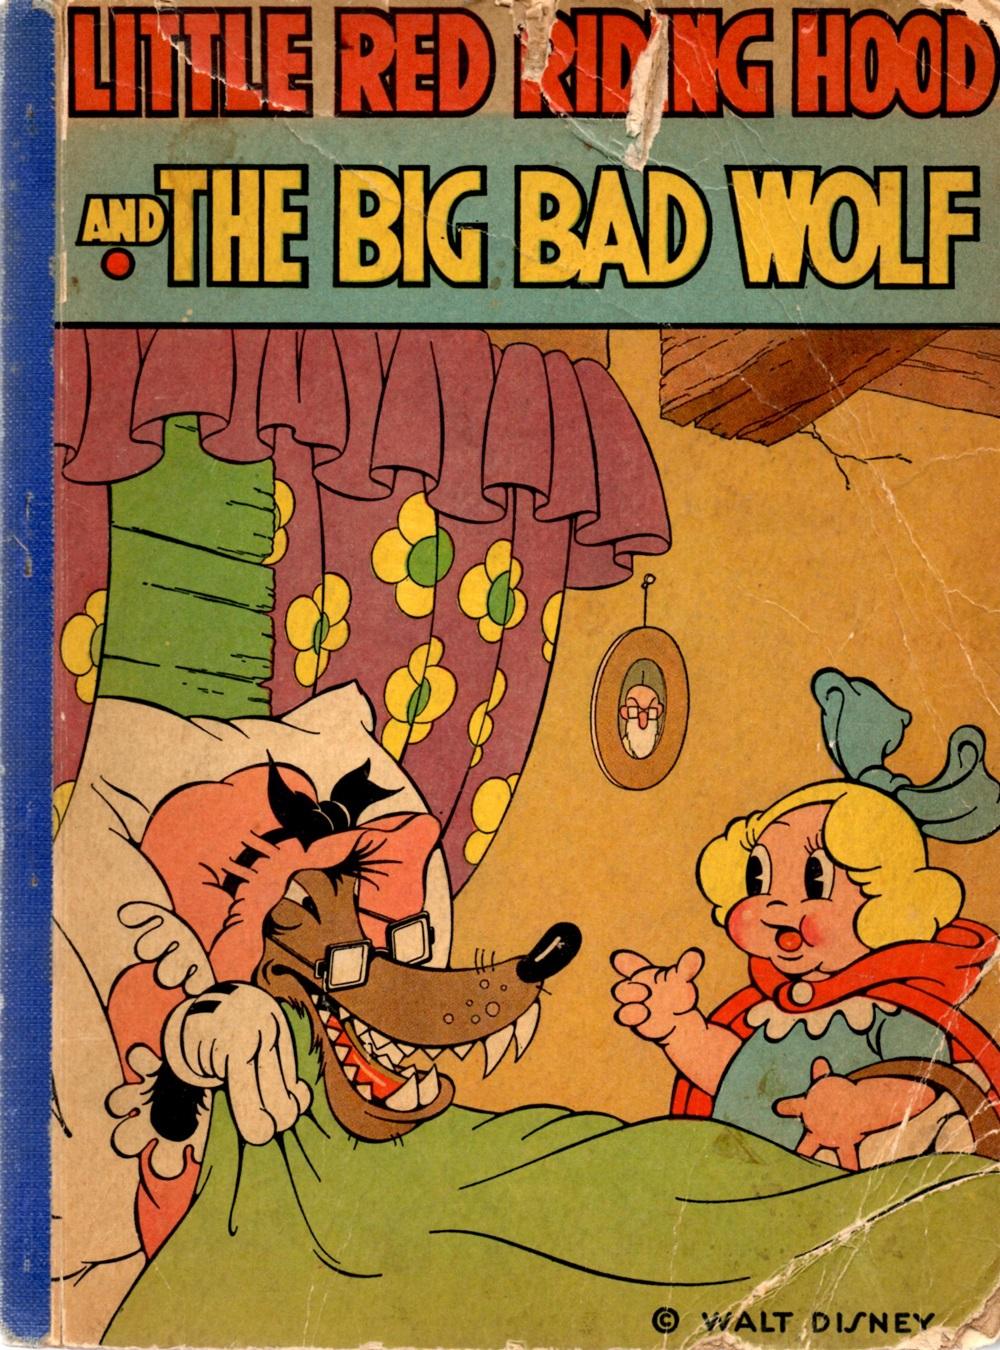 Little Red Riding Hood and the Big Bad Wolf by Staff the Walt Disney Studios: Reading Copy Paperback (1934) |